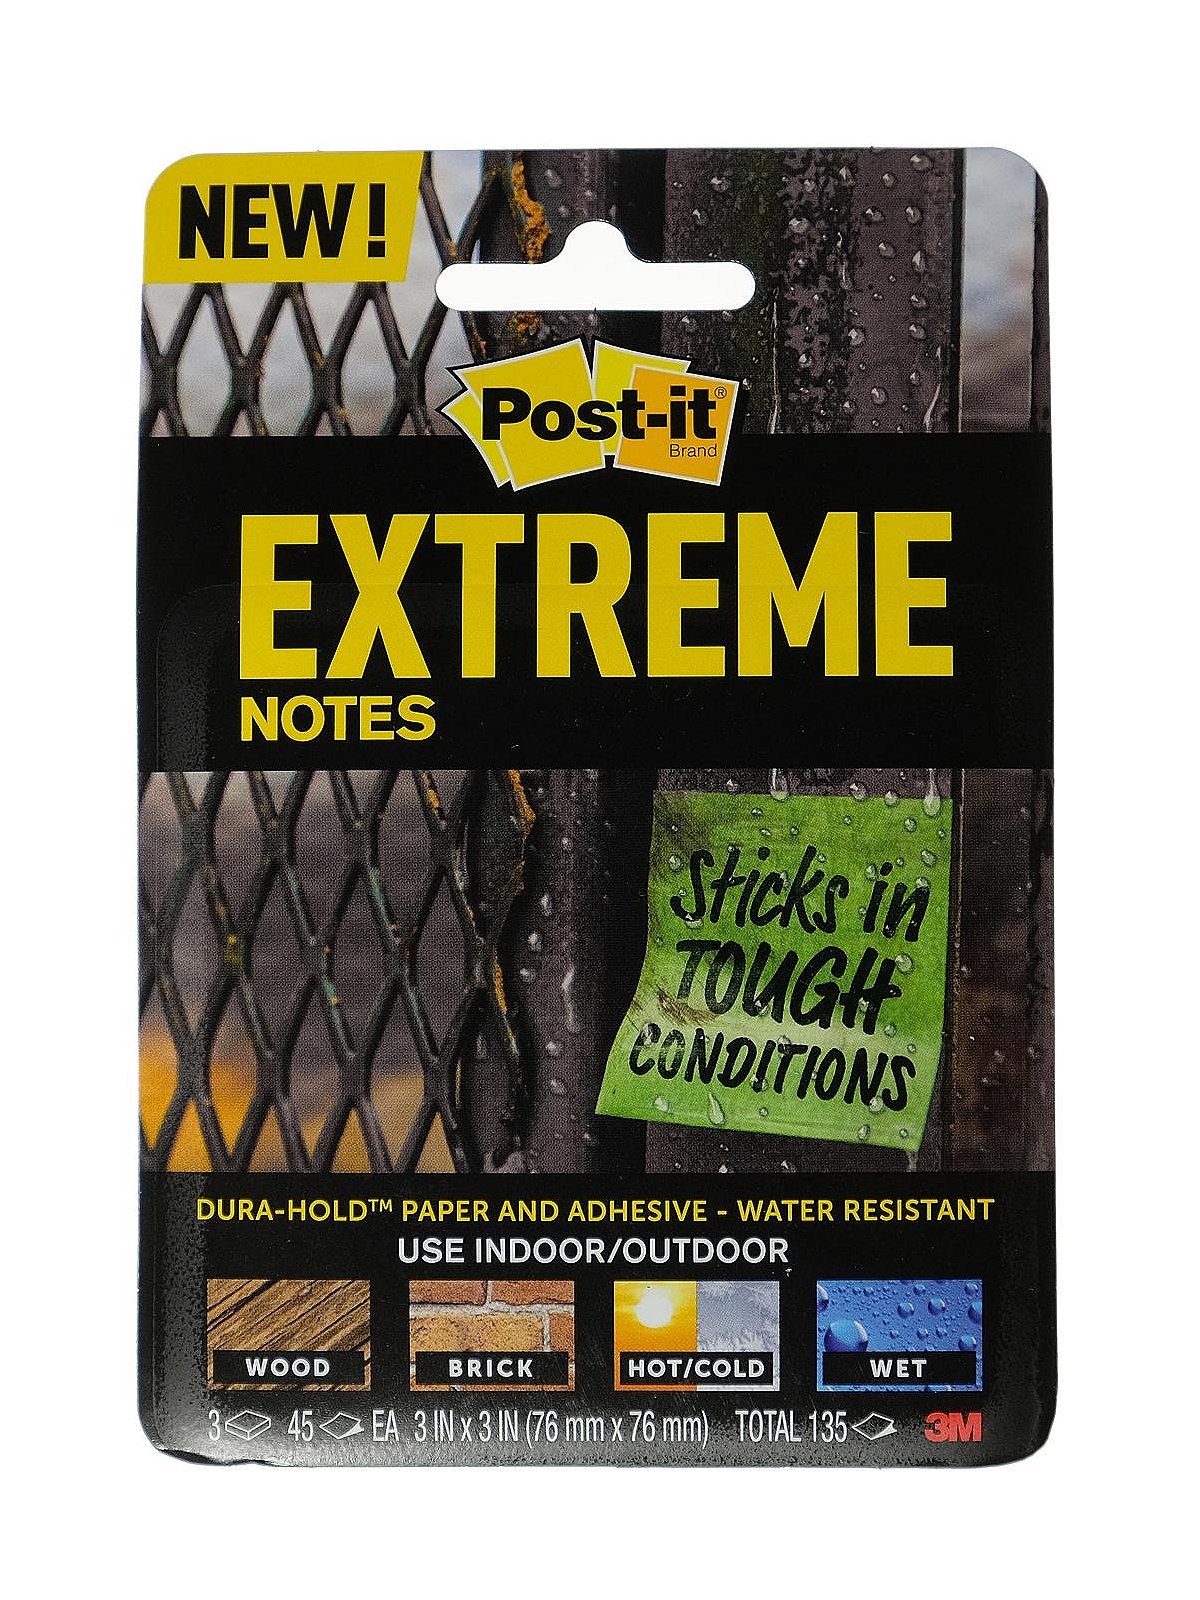 These Post-it Notes can handle extreme/wet conditions: 24-pack for $12.50  (Up to 35% off)